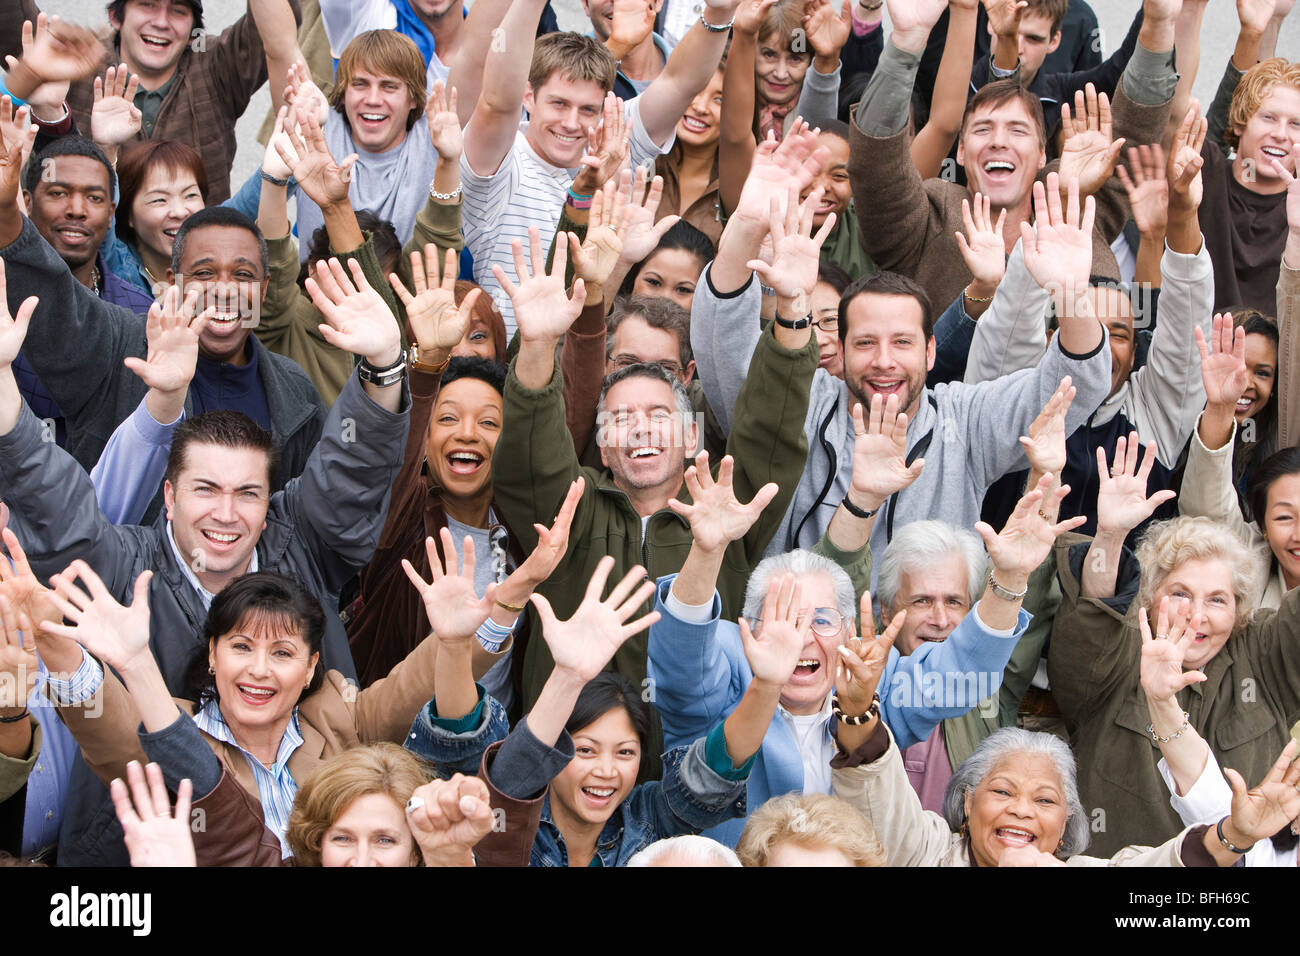 Crowd with arms raised Stock Photo